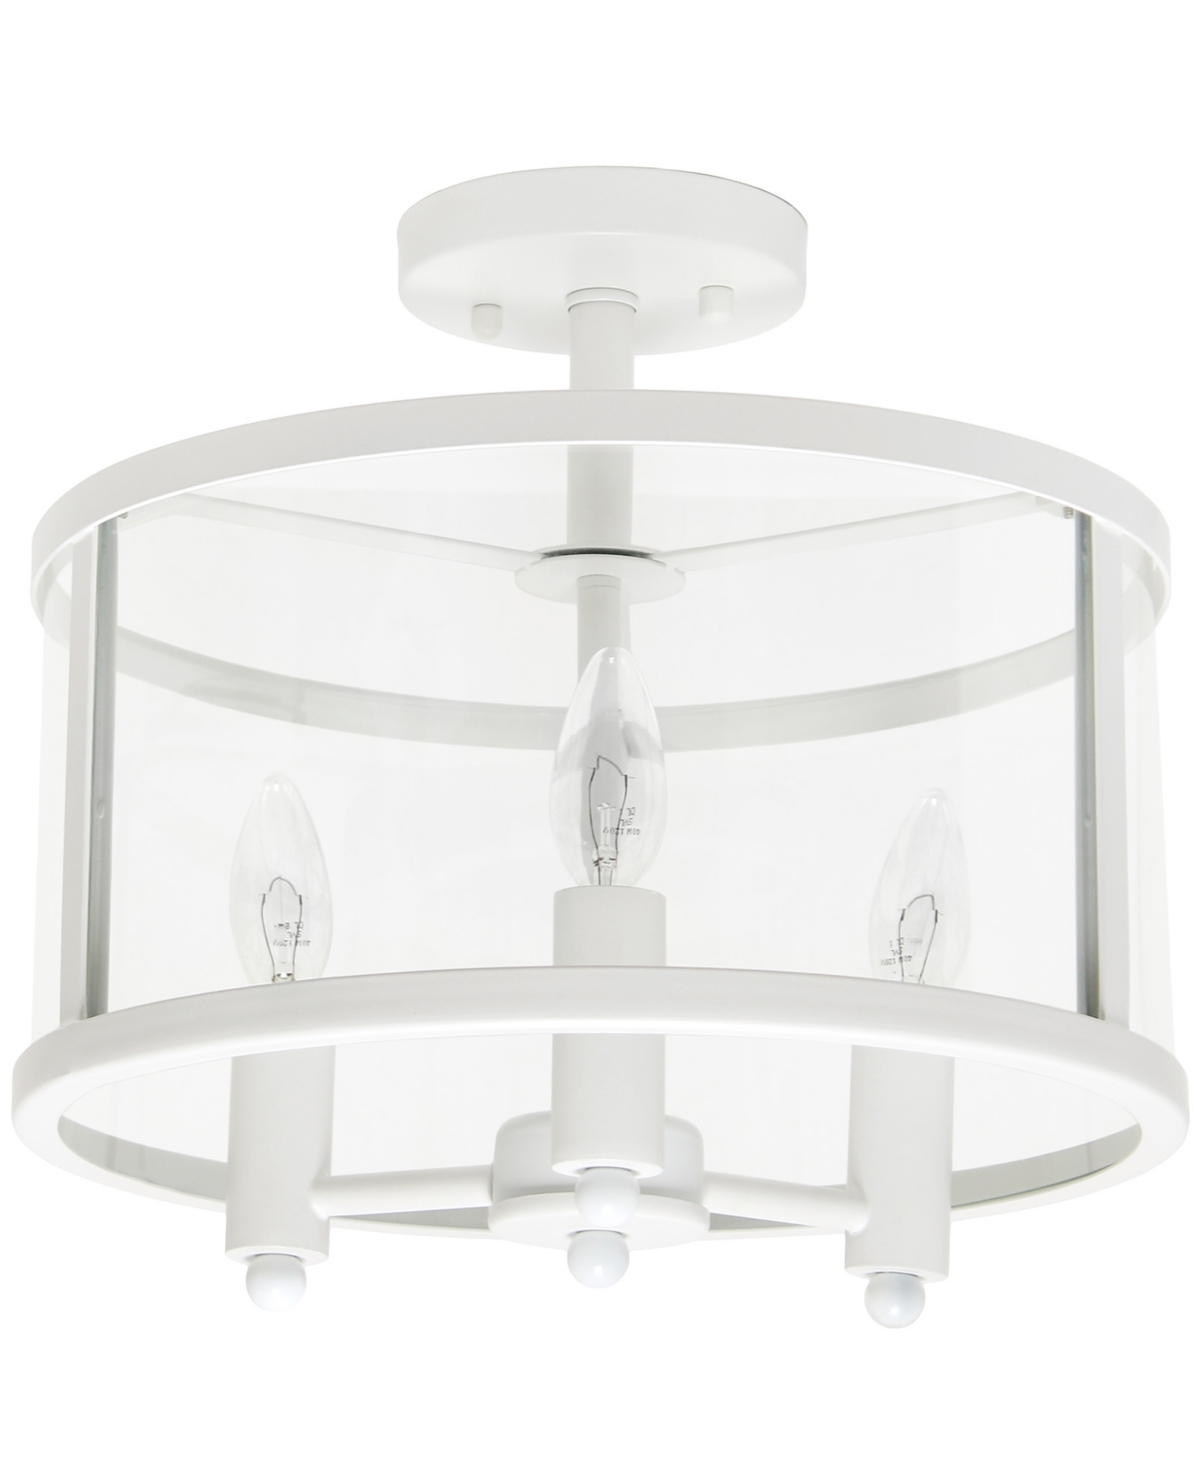 All The Rages 3-light 13" Industrial Farmhouse Glass And Metallic Accented Semi-flush Mount In White